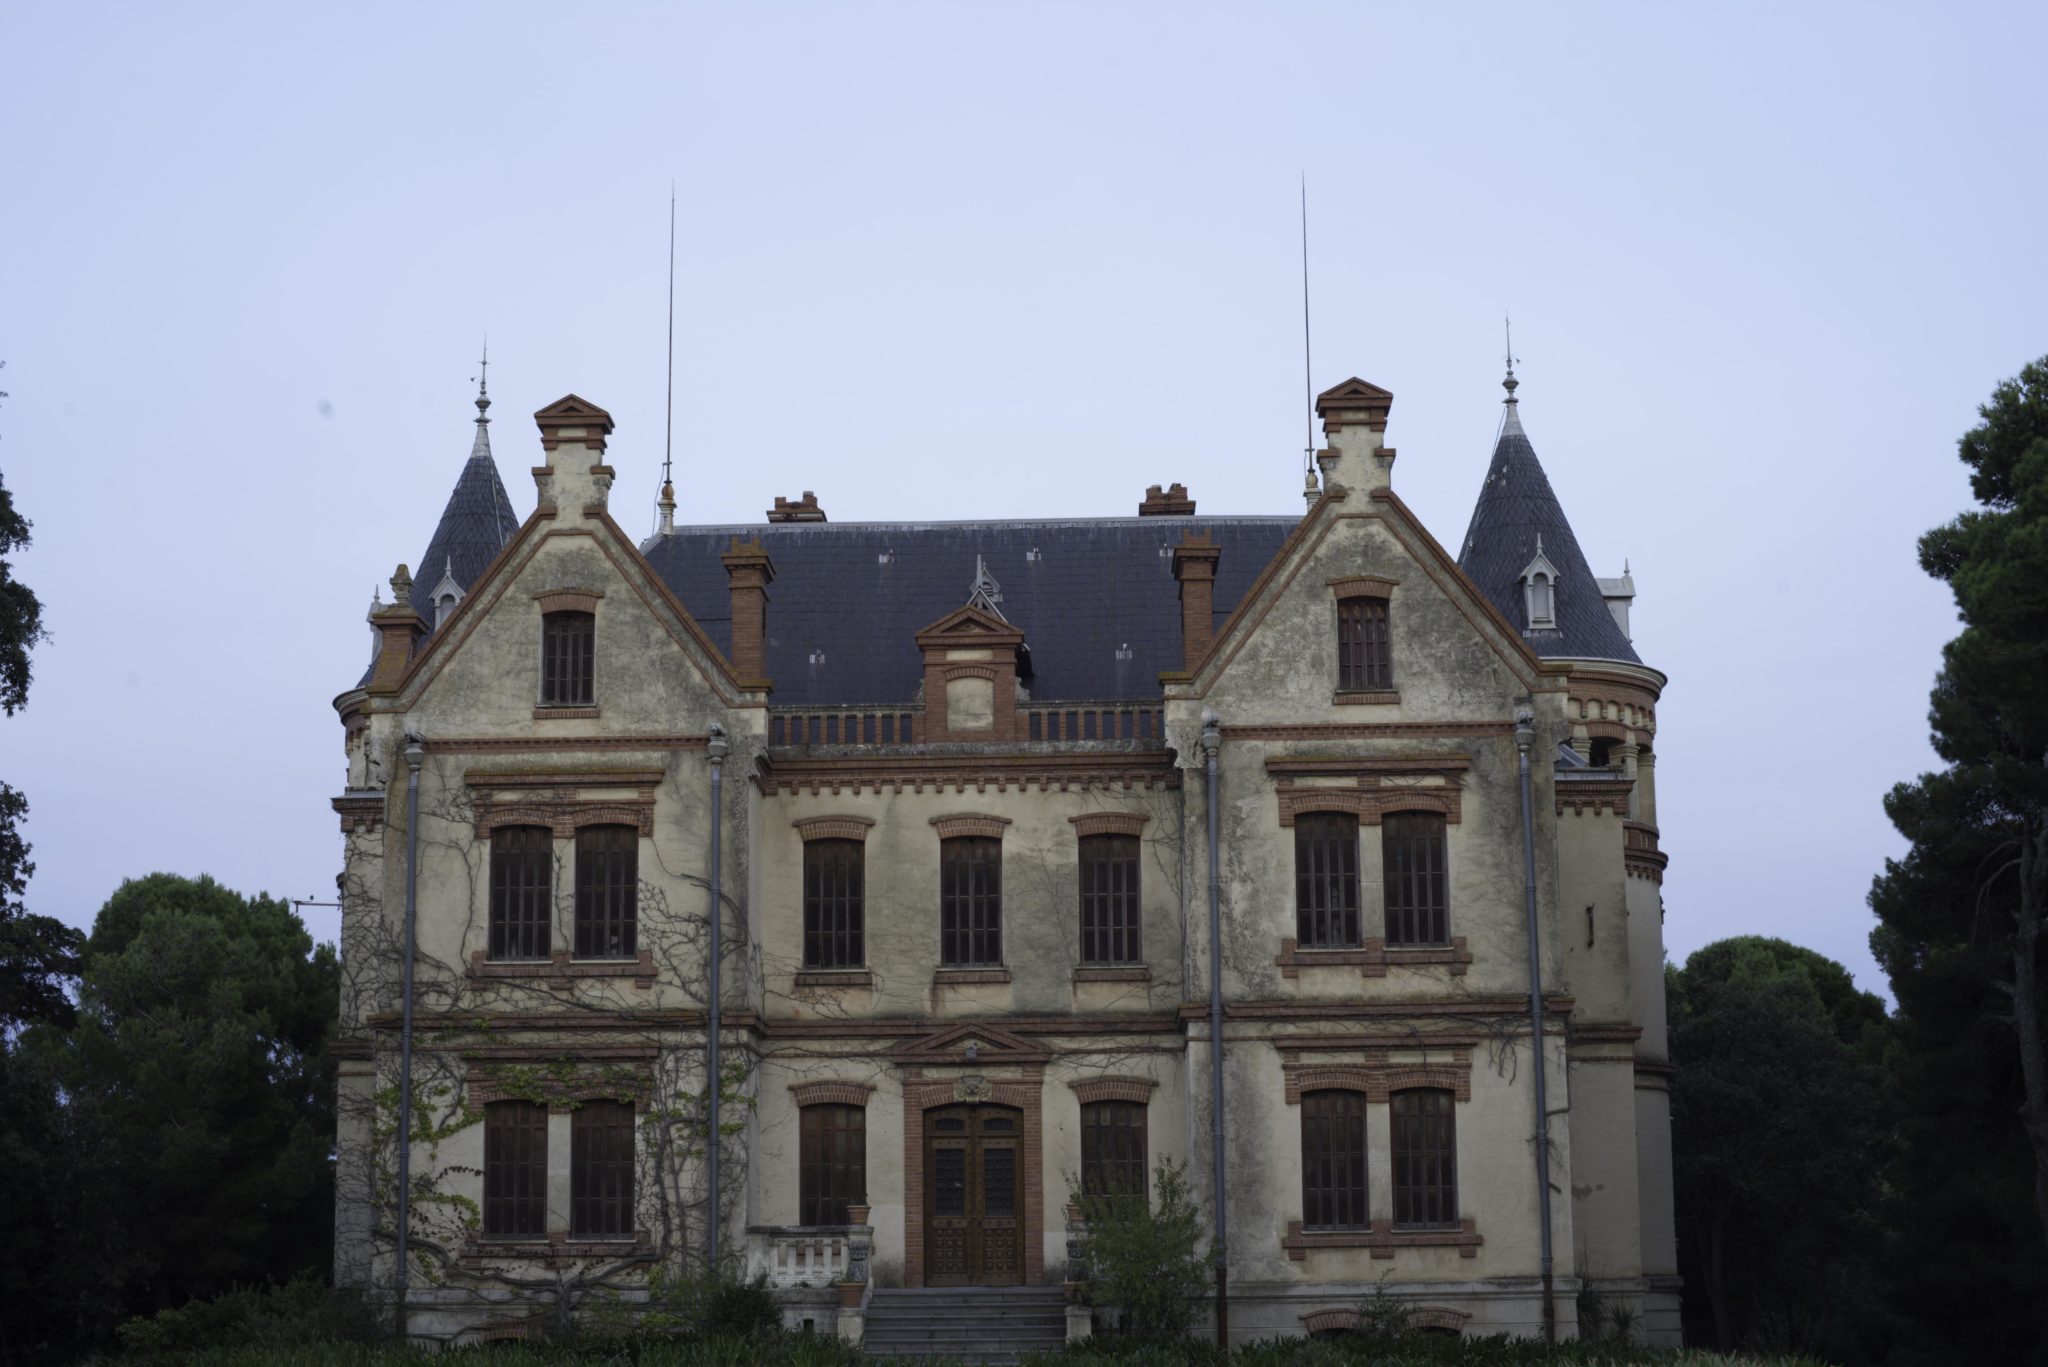 Artist-in-Residence, Rhapsodic Night Landscape Photographs and Exhibition in France: Chateau